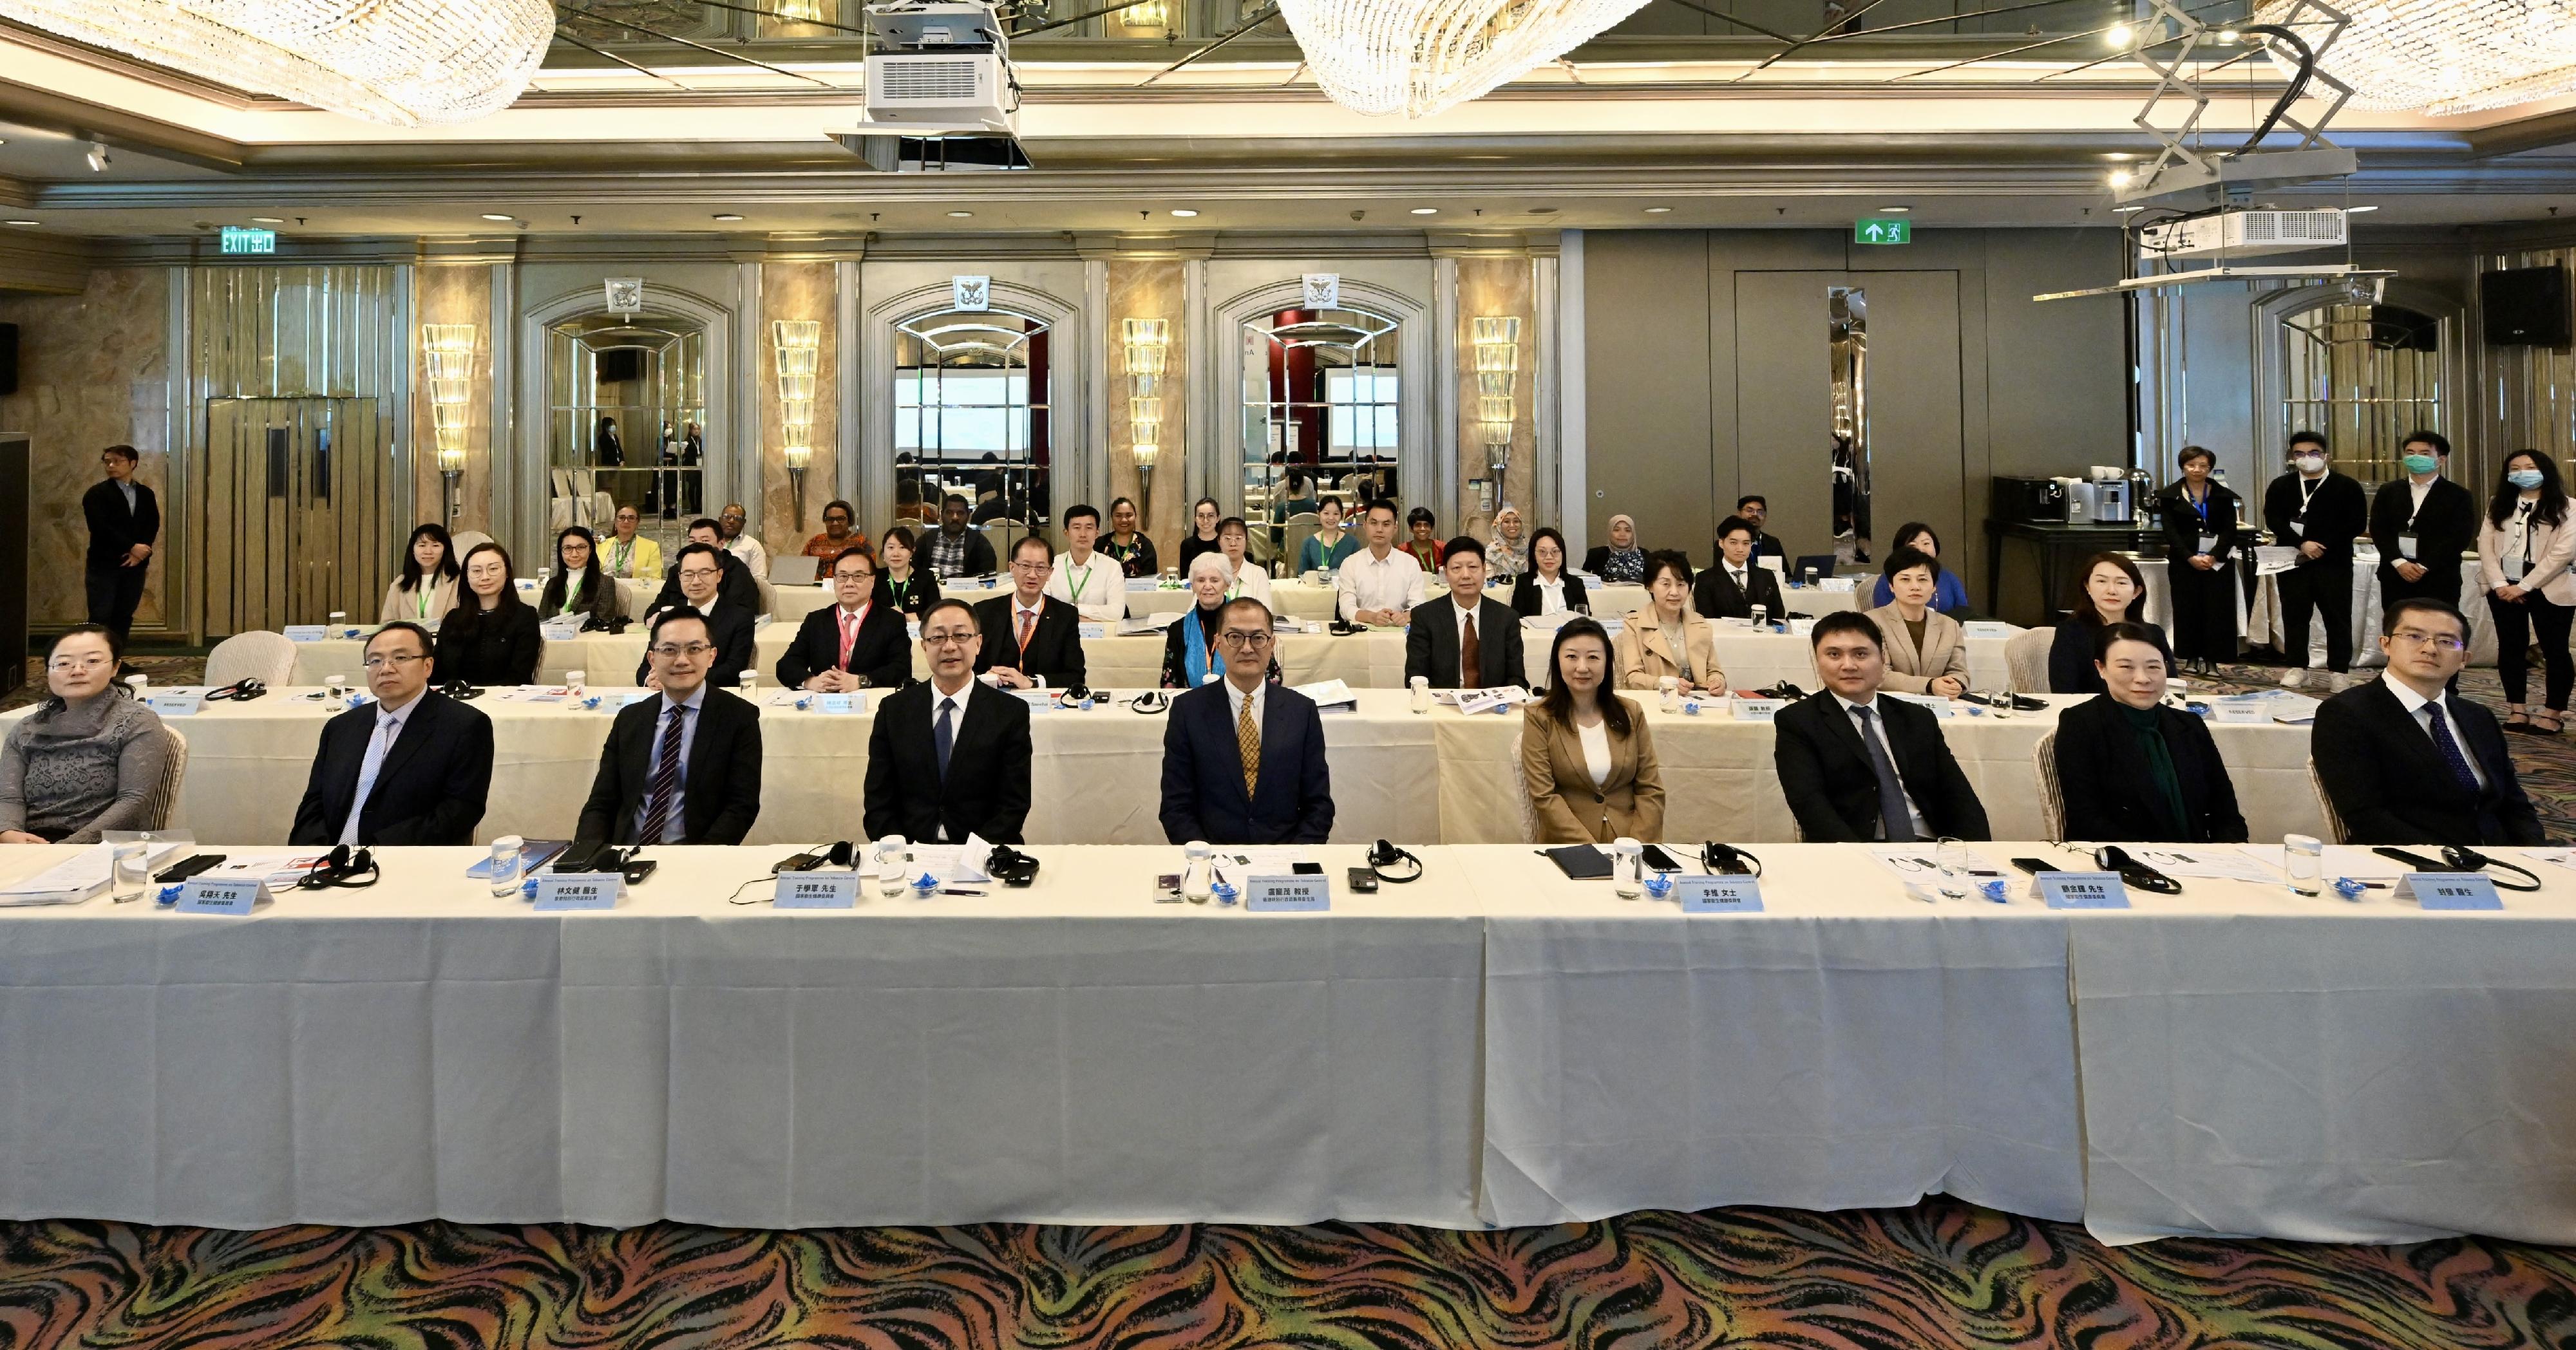 The Tobacco and Alcohol Control Office of the Department of Health organised the five-day Annual Training Programme on Tobacco Control 2023, and the closing ceremony was held today (December 7). Photo shows Vice-minister of the National Health Commission Mr Yu Xuejun (front row, fourth left), the Secretary for Health, Professor Lo Chung-mau (front row, centre), and the Director of Health, Dr Ronald Lam (front row, third left), with the participants during the closing ceremony.
